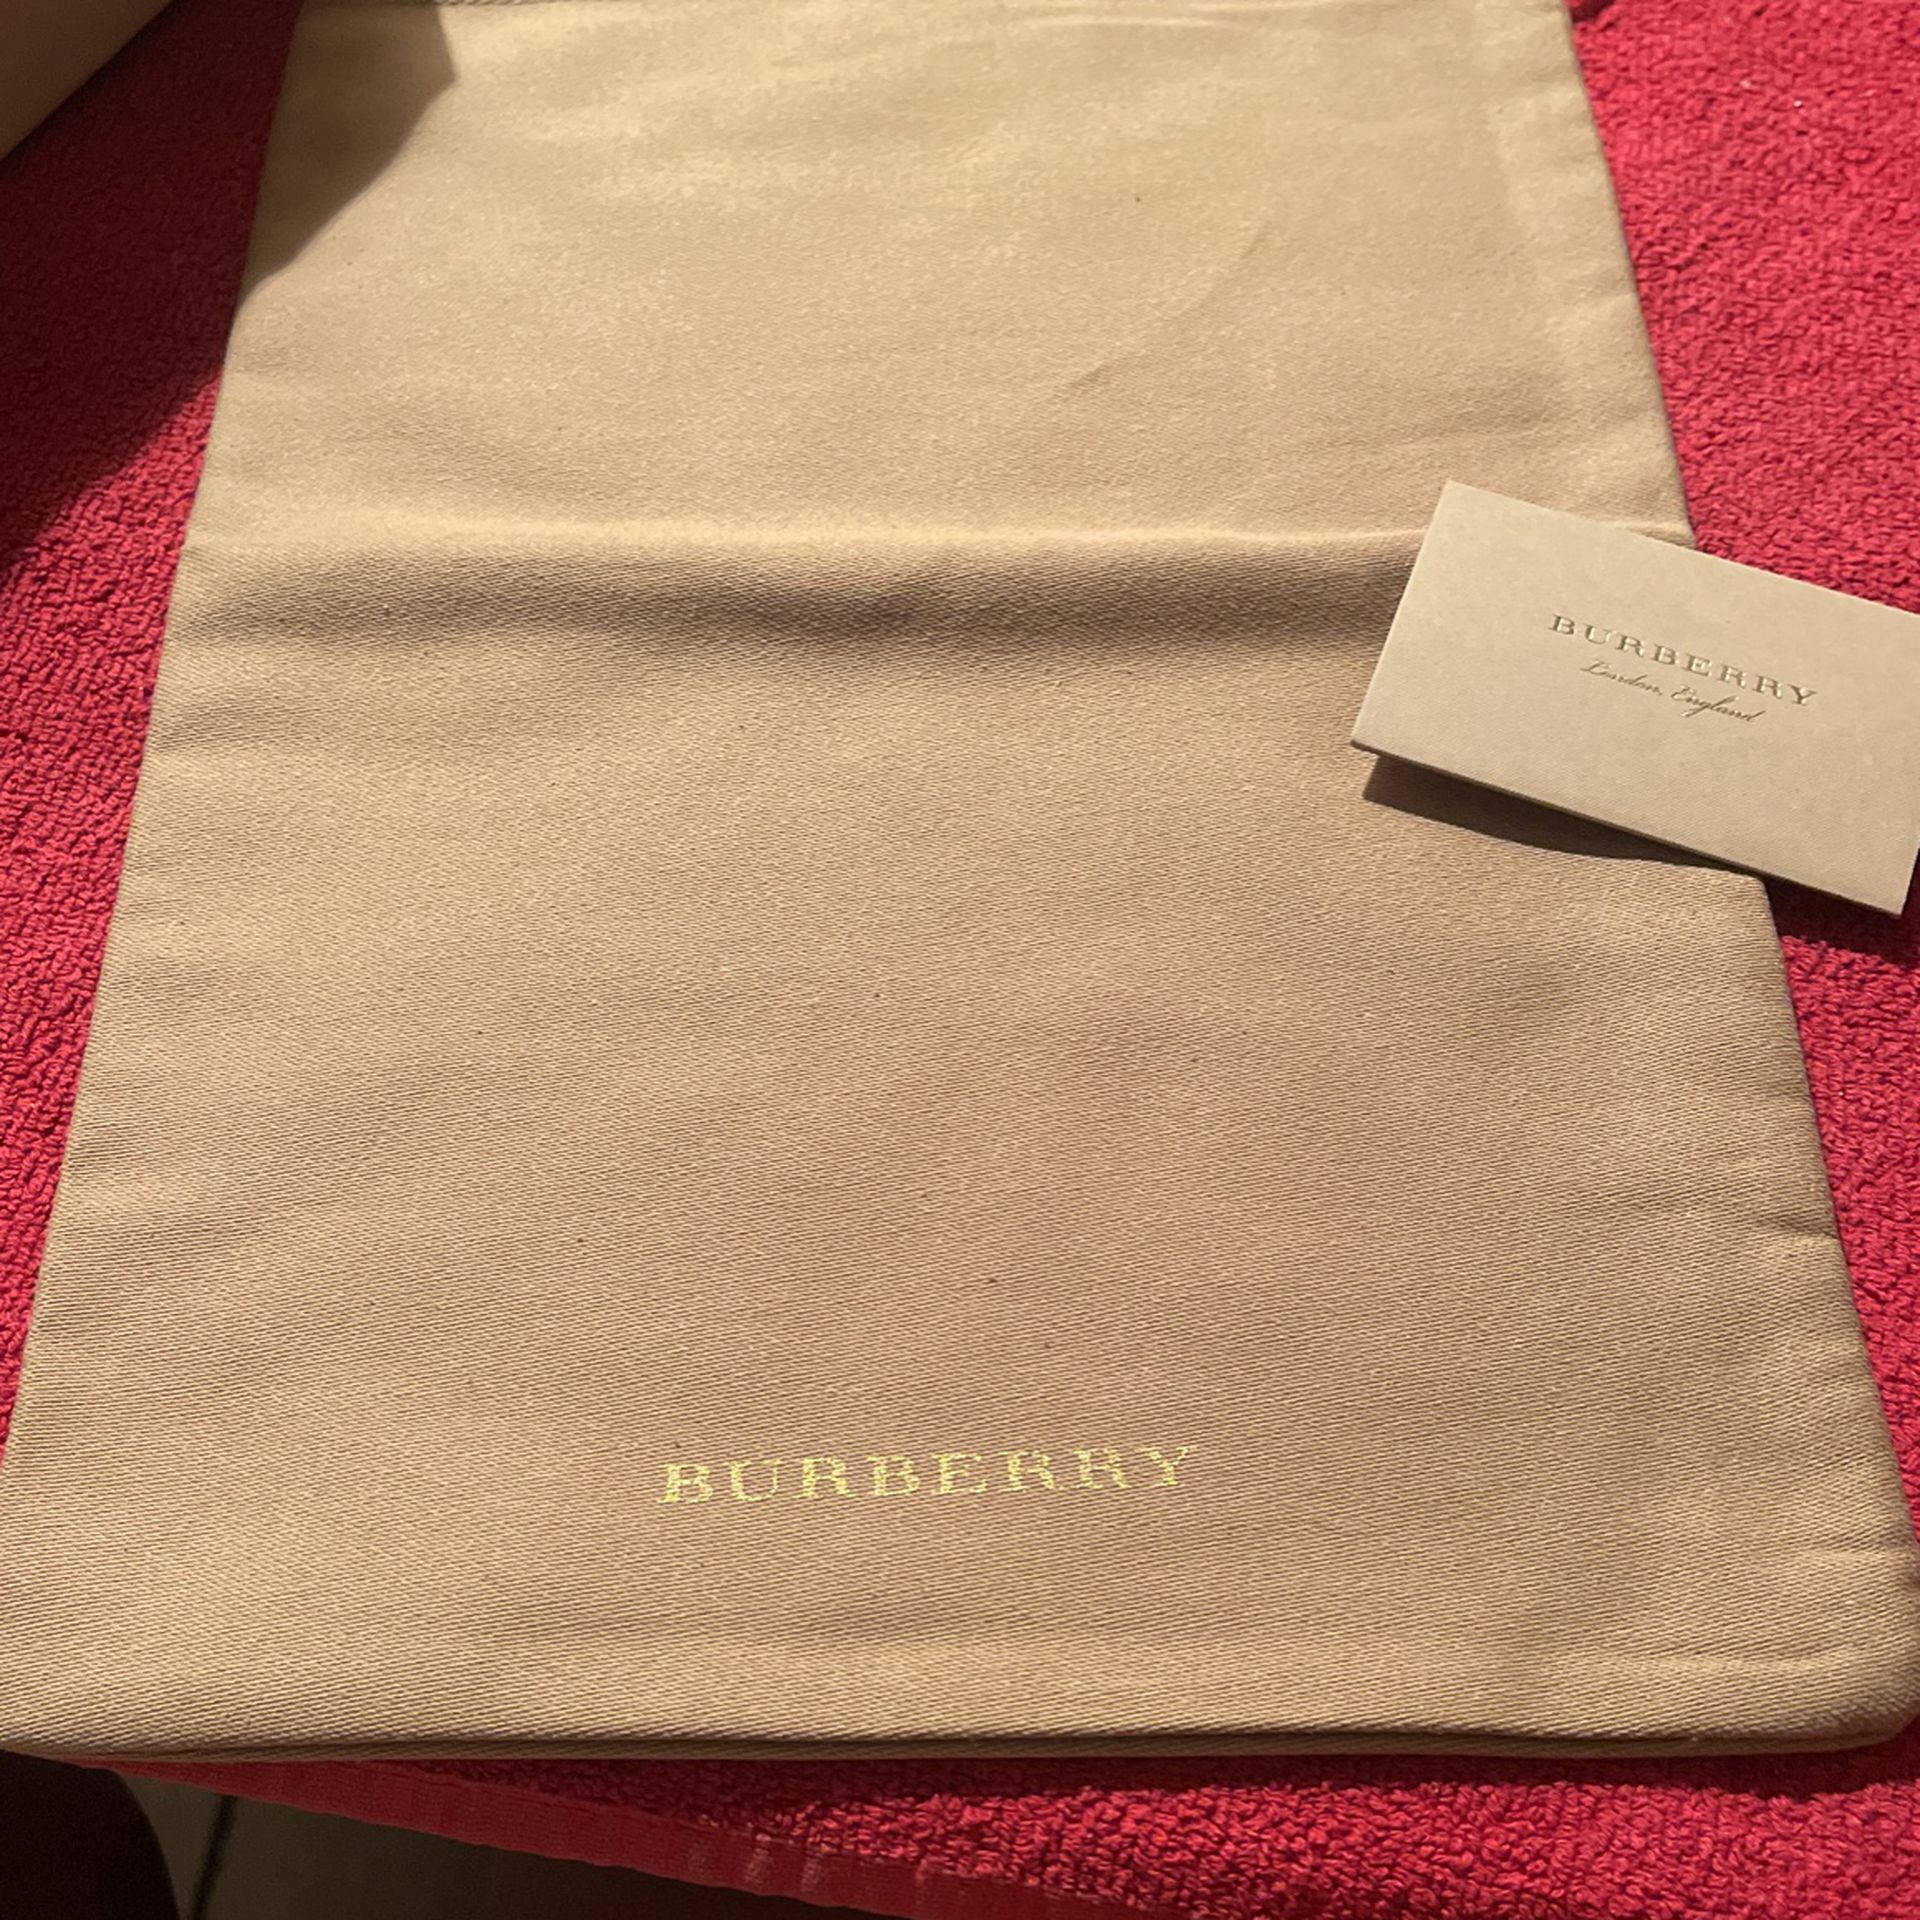  Burberry Dust Bag with Shoe Box